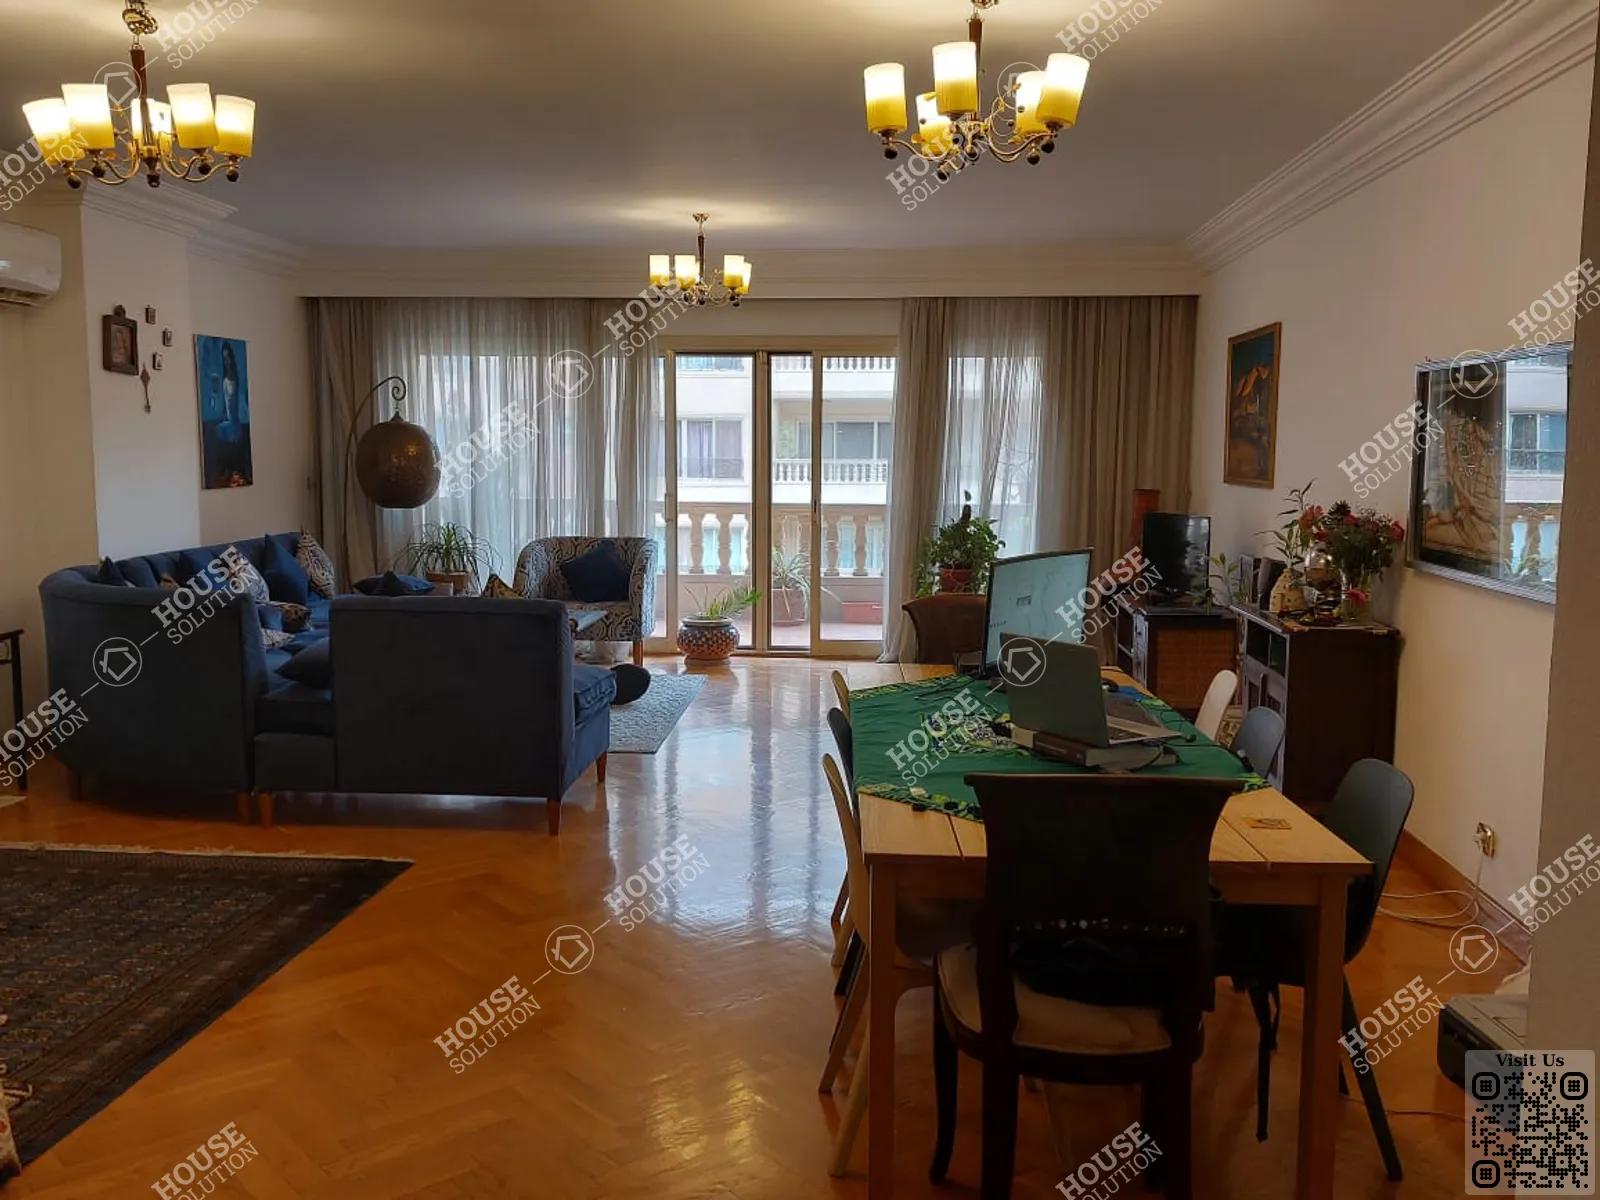 RECEPTION  @ Apartments For Rent In Maadi Maadi Sarayat Area: 330 m² consists of 4 Bedrooms 4 Bathrooms Modern furnished 5 stars #5433-0